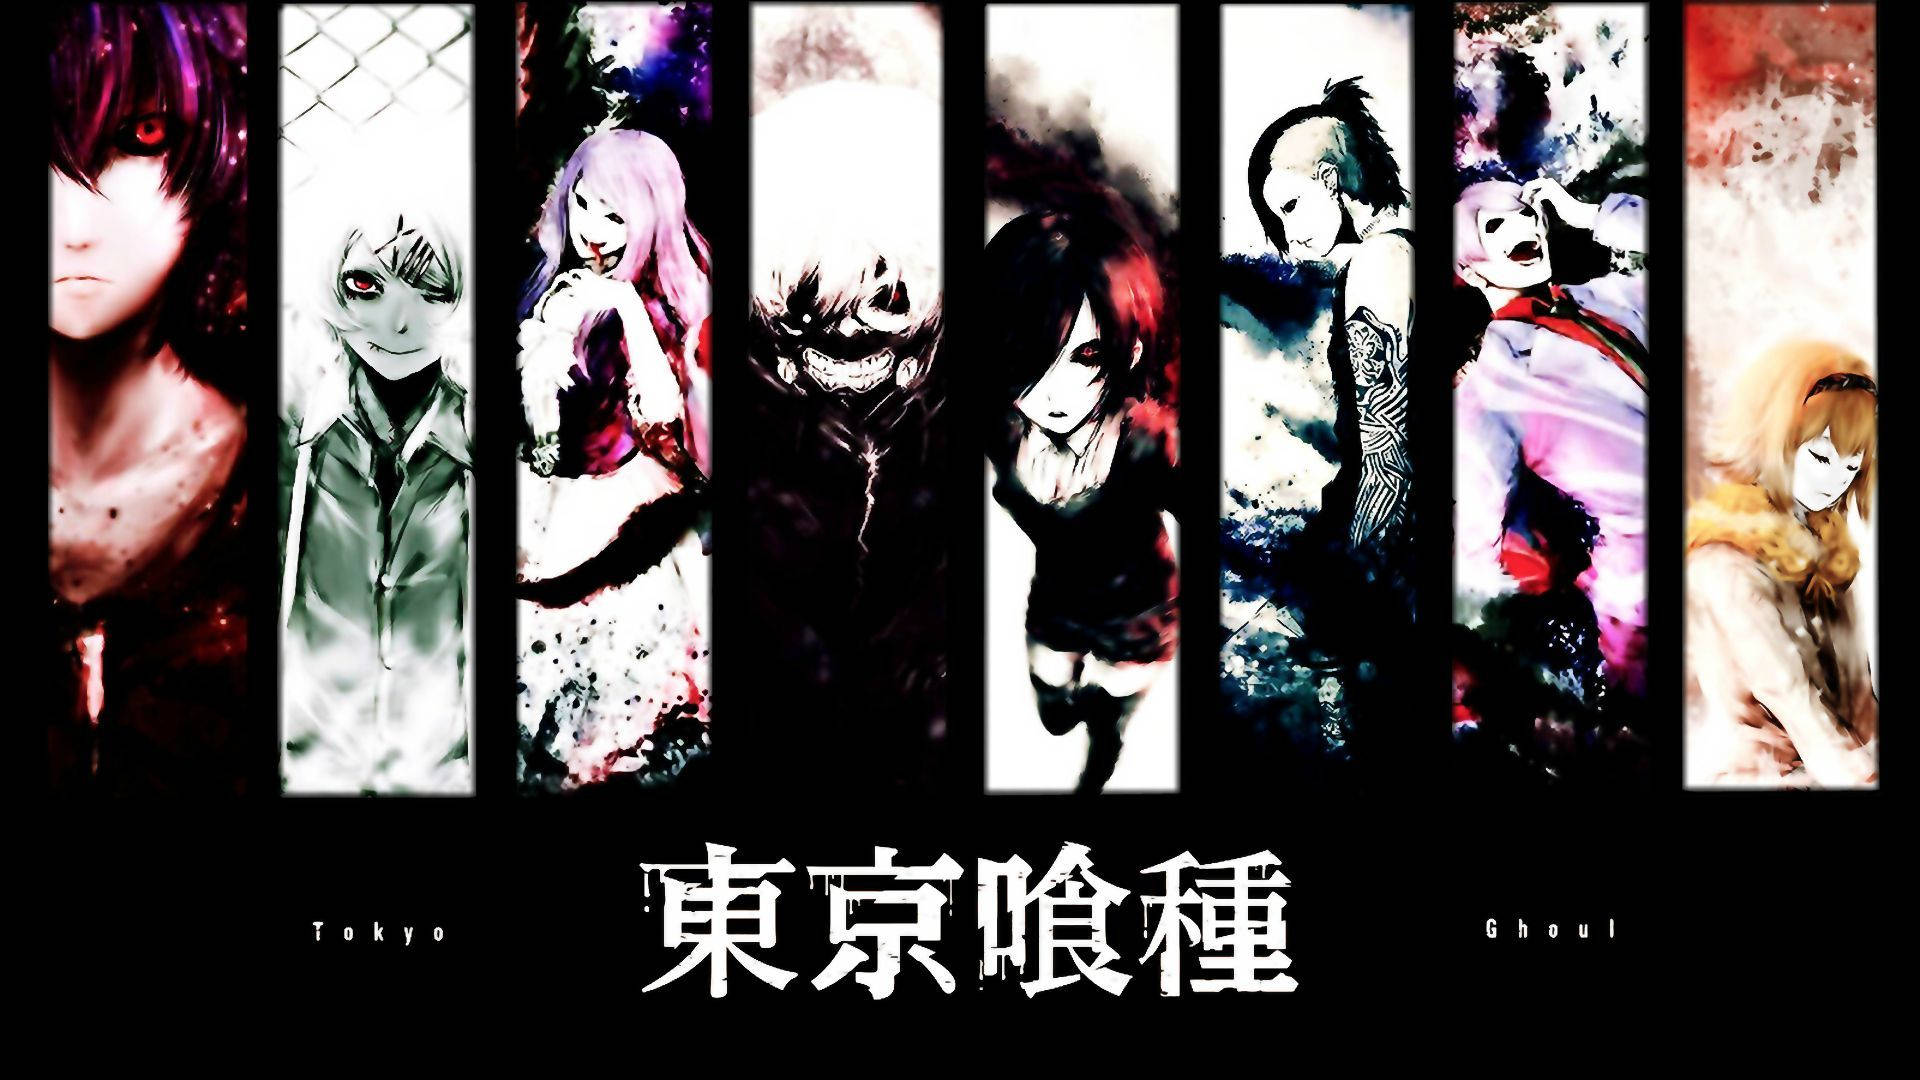 Tokyo Ghoul 1920X1080 Wallpaper and Background Image